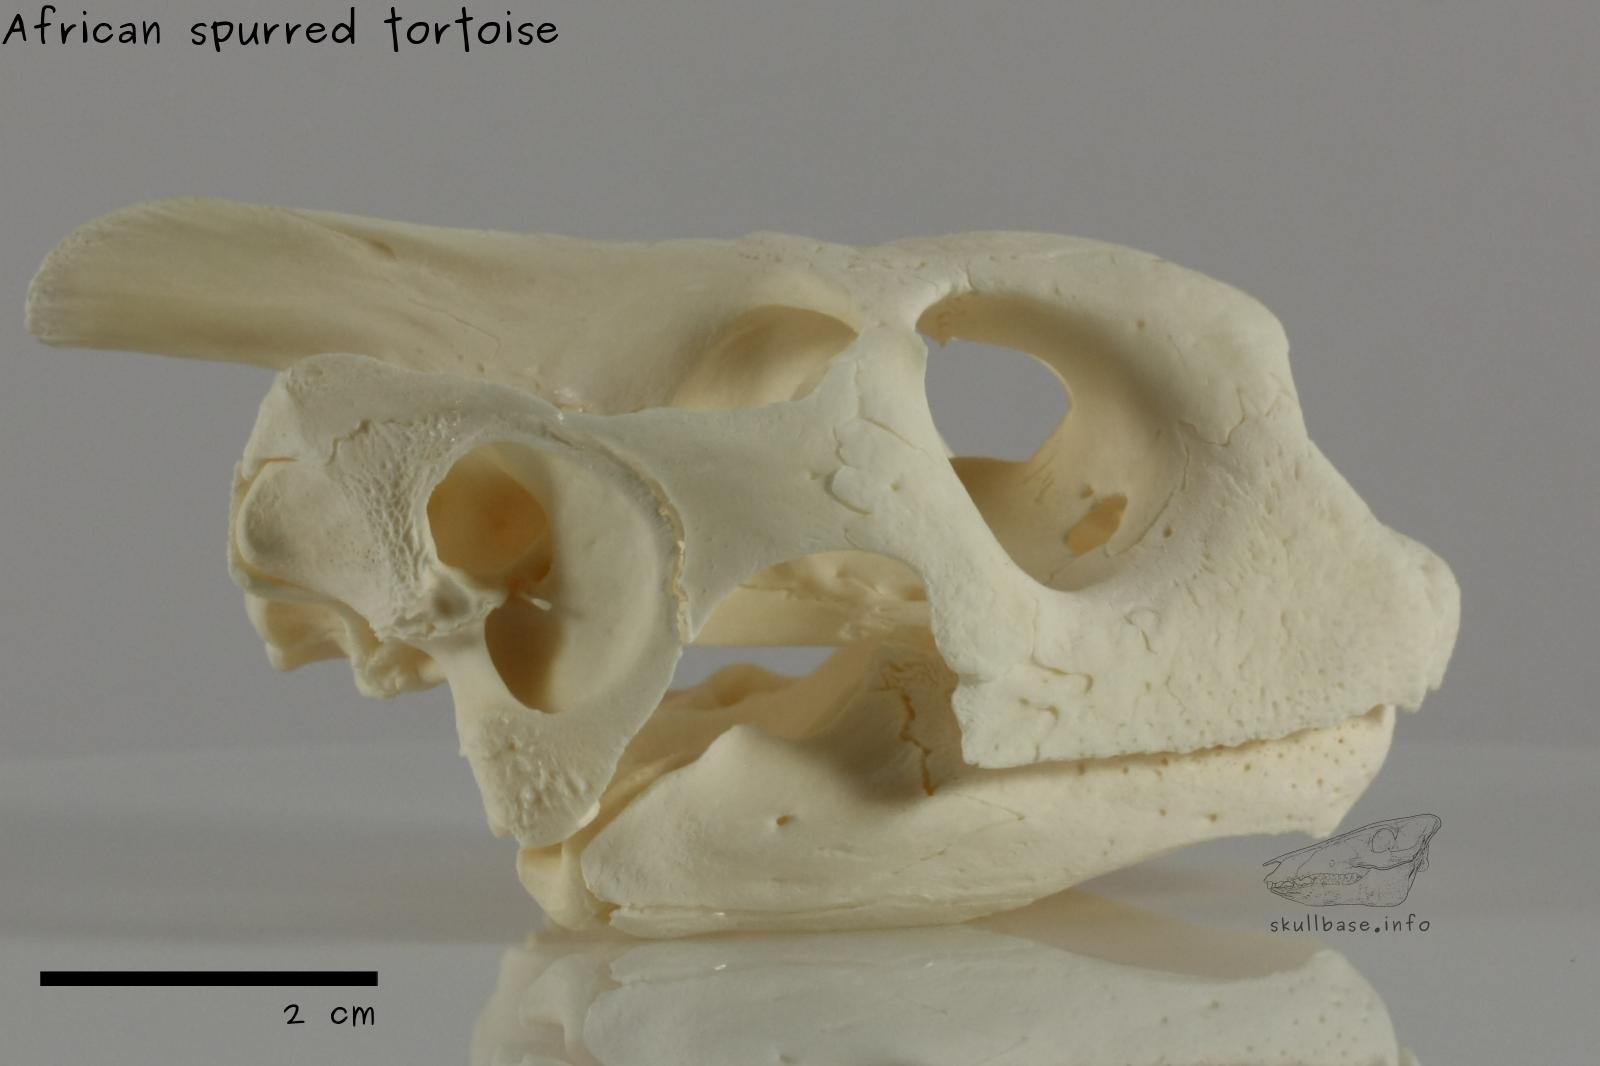 African spurred tortoise (Centrochelys sulcata) skull lateral view